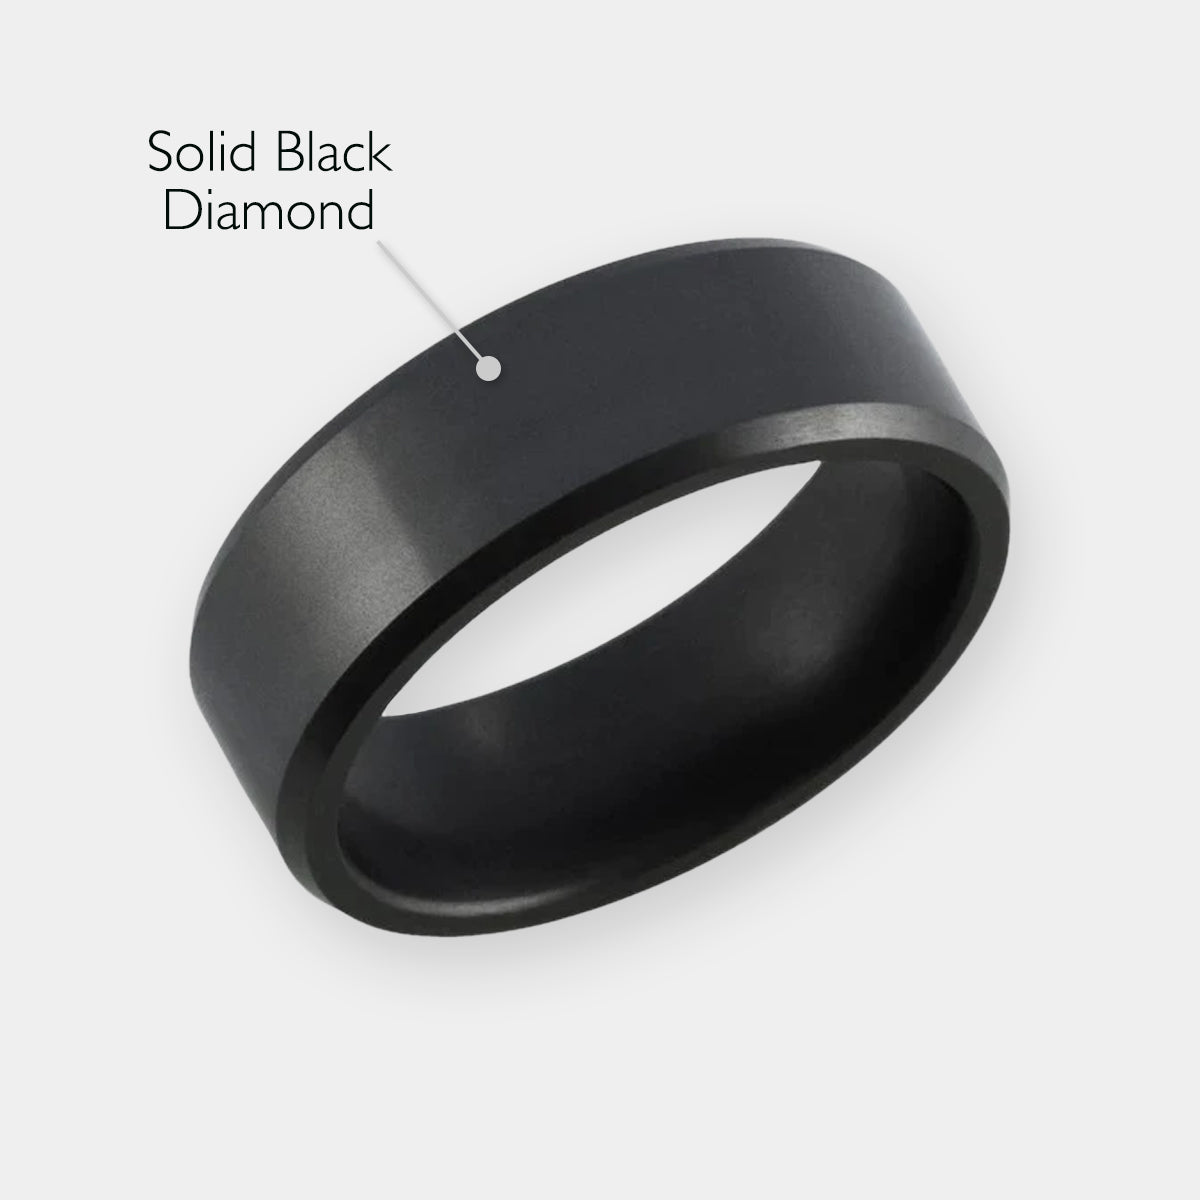 Men's Solid Black Diamond Ring with material descriptions listed | Elysium ARES | Men’s Black Diamond Rings | Black Diamond Wedding Ring